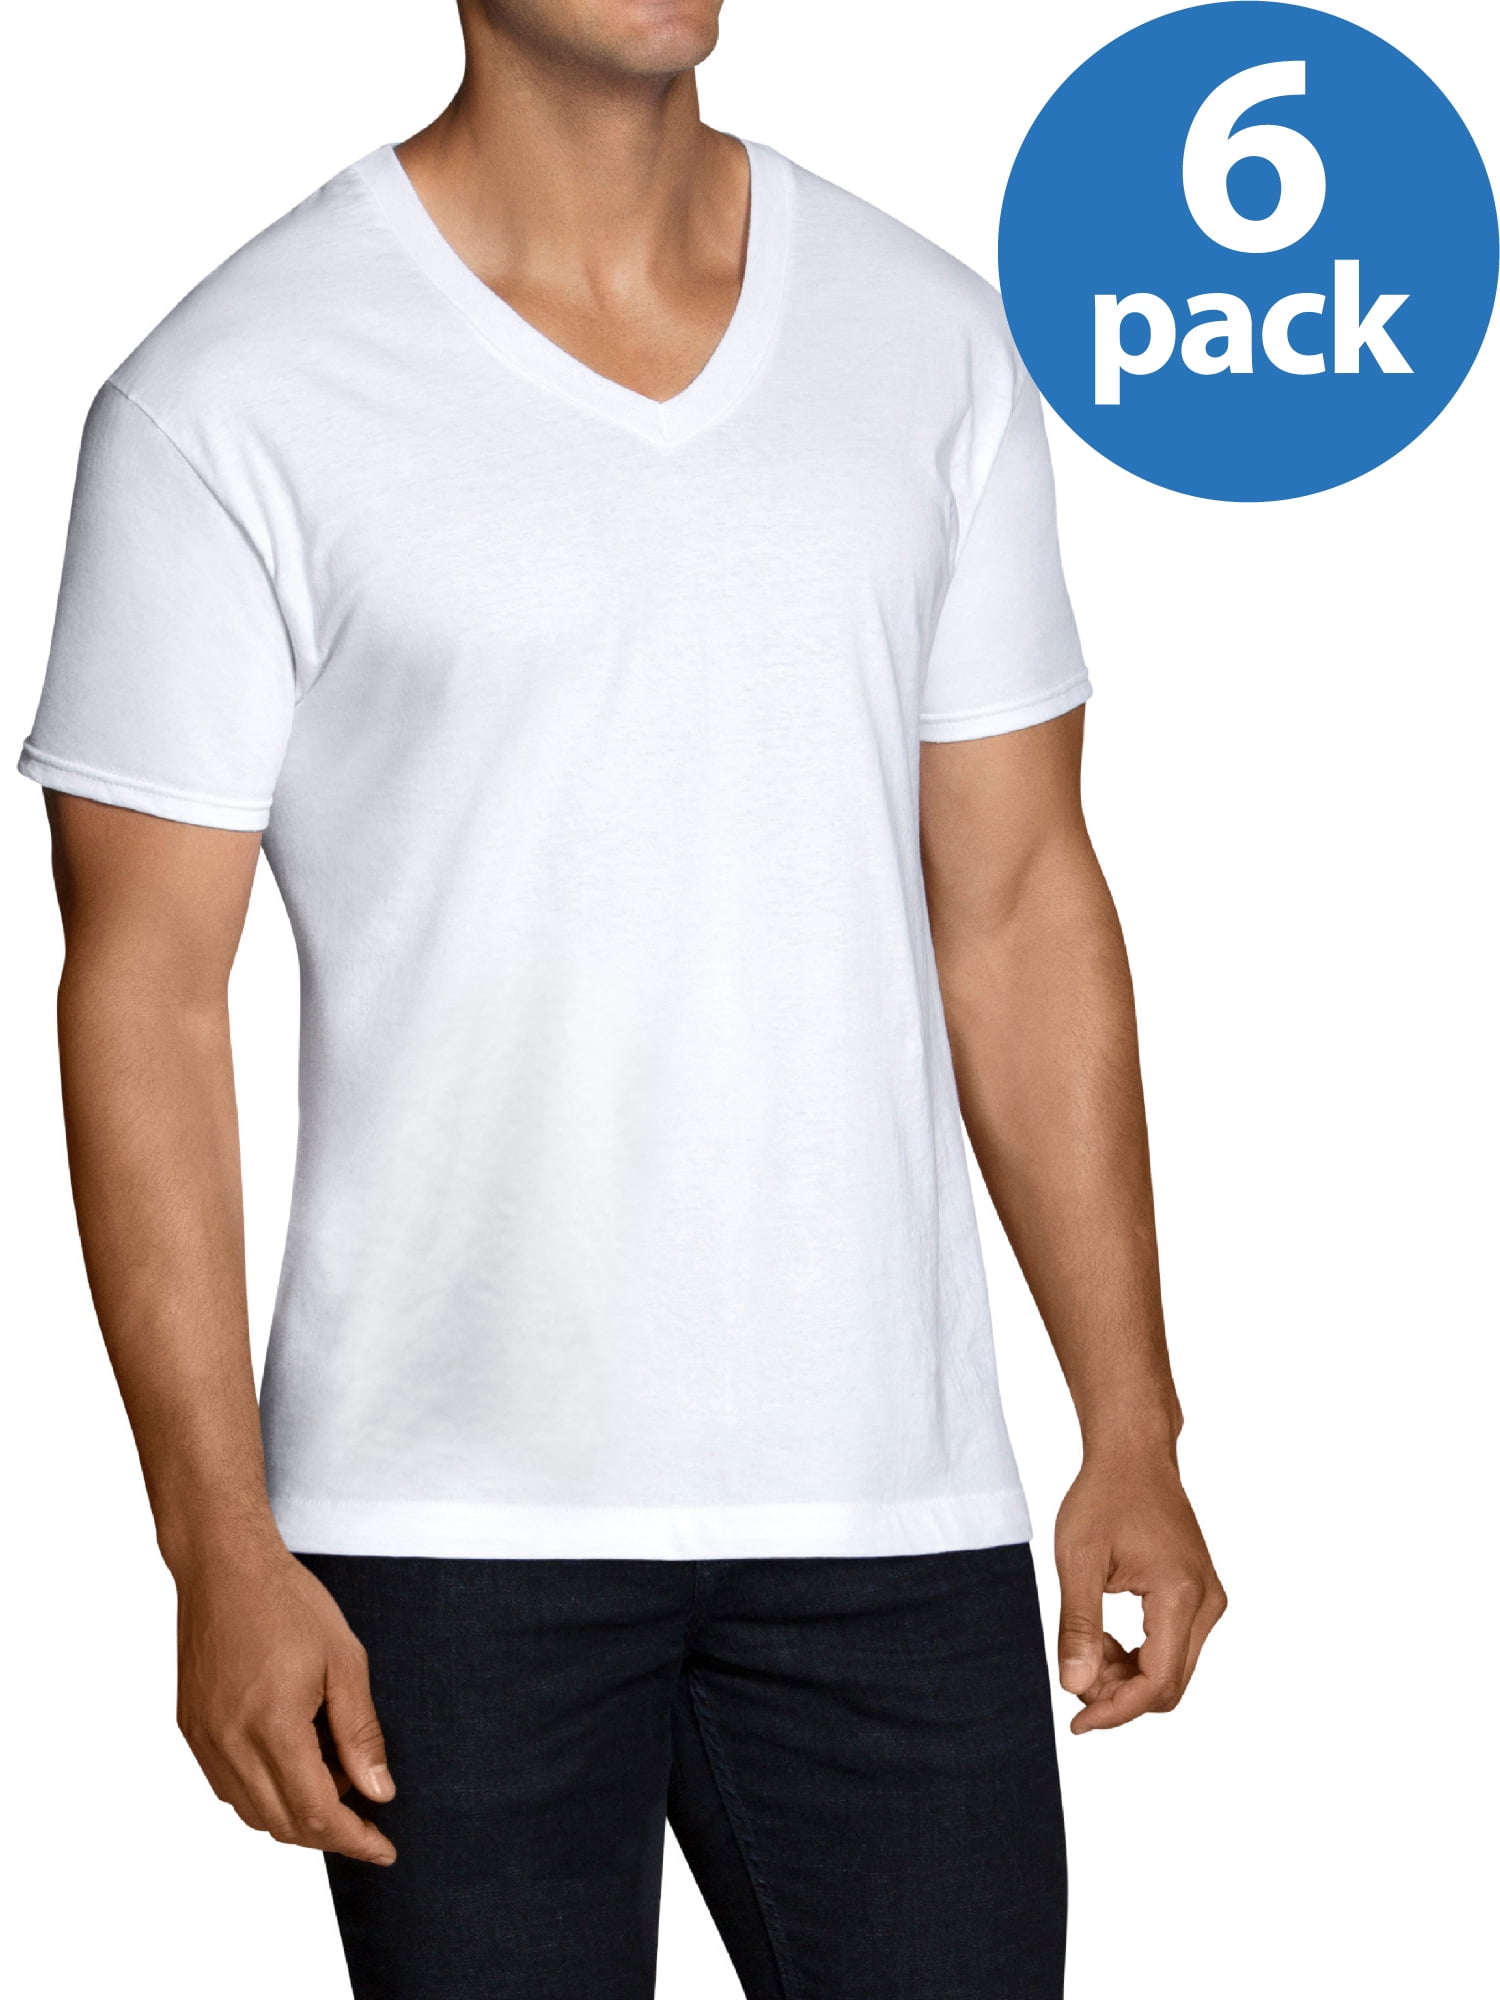 Fruit of the Loom Tall Men's Classic White V-Neck T-Shirts, 6 Pack ...